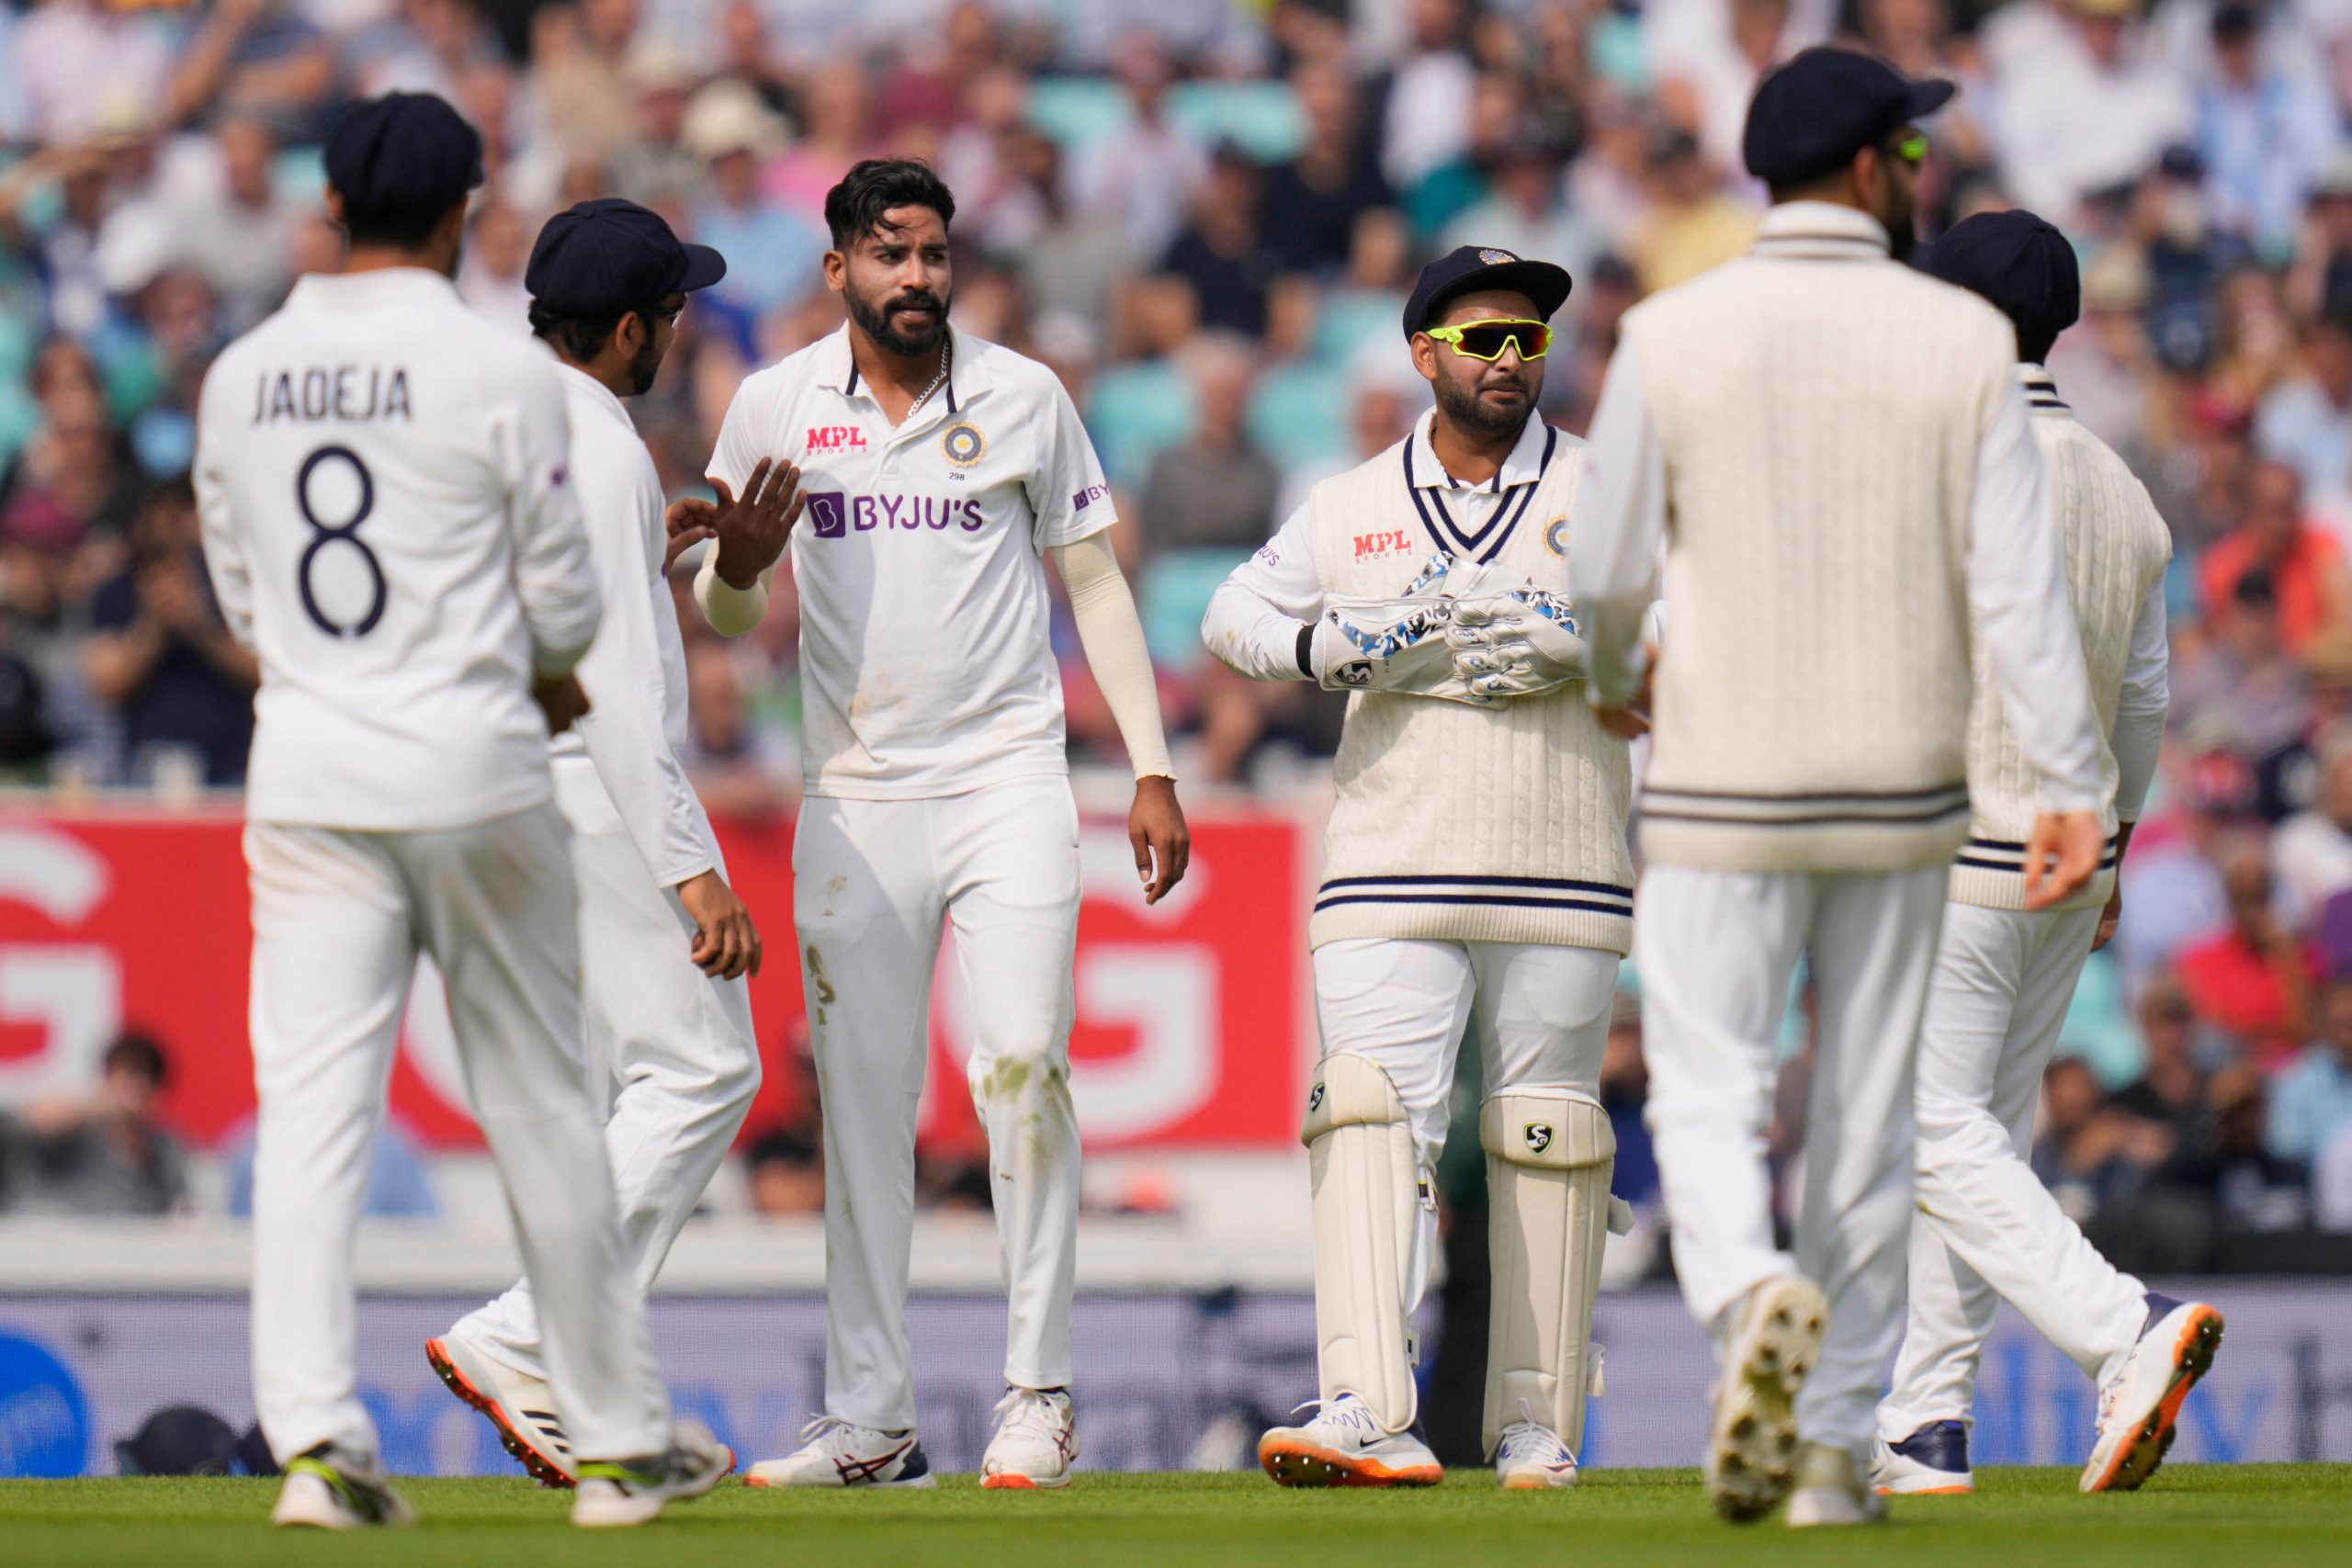 Day 4: England battle out weary Indian bowling, need 291 runs to win